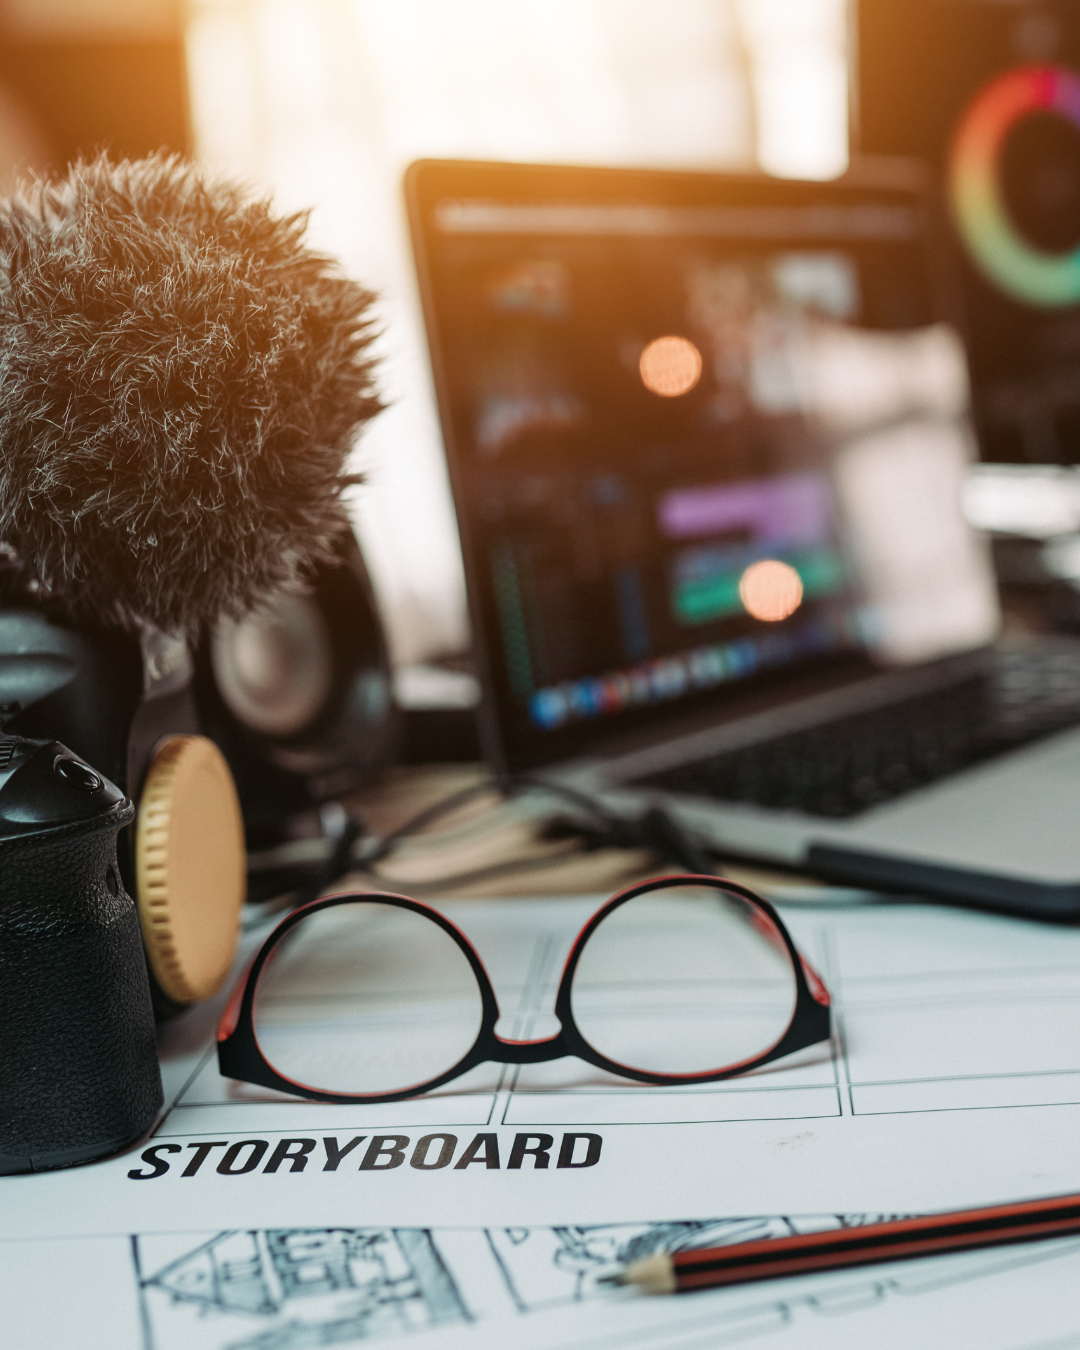 table with a sheet that says STORYBOARD and on next to it are; a laptop, camera with microphone, glasses and a computer